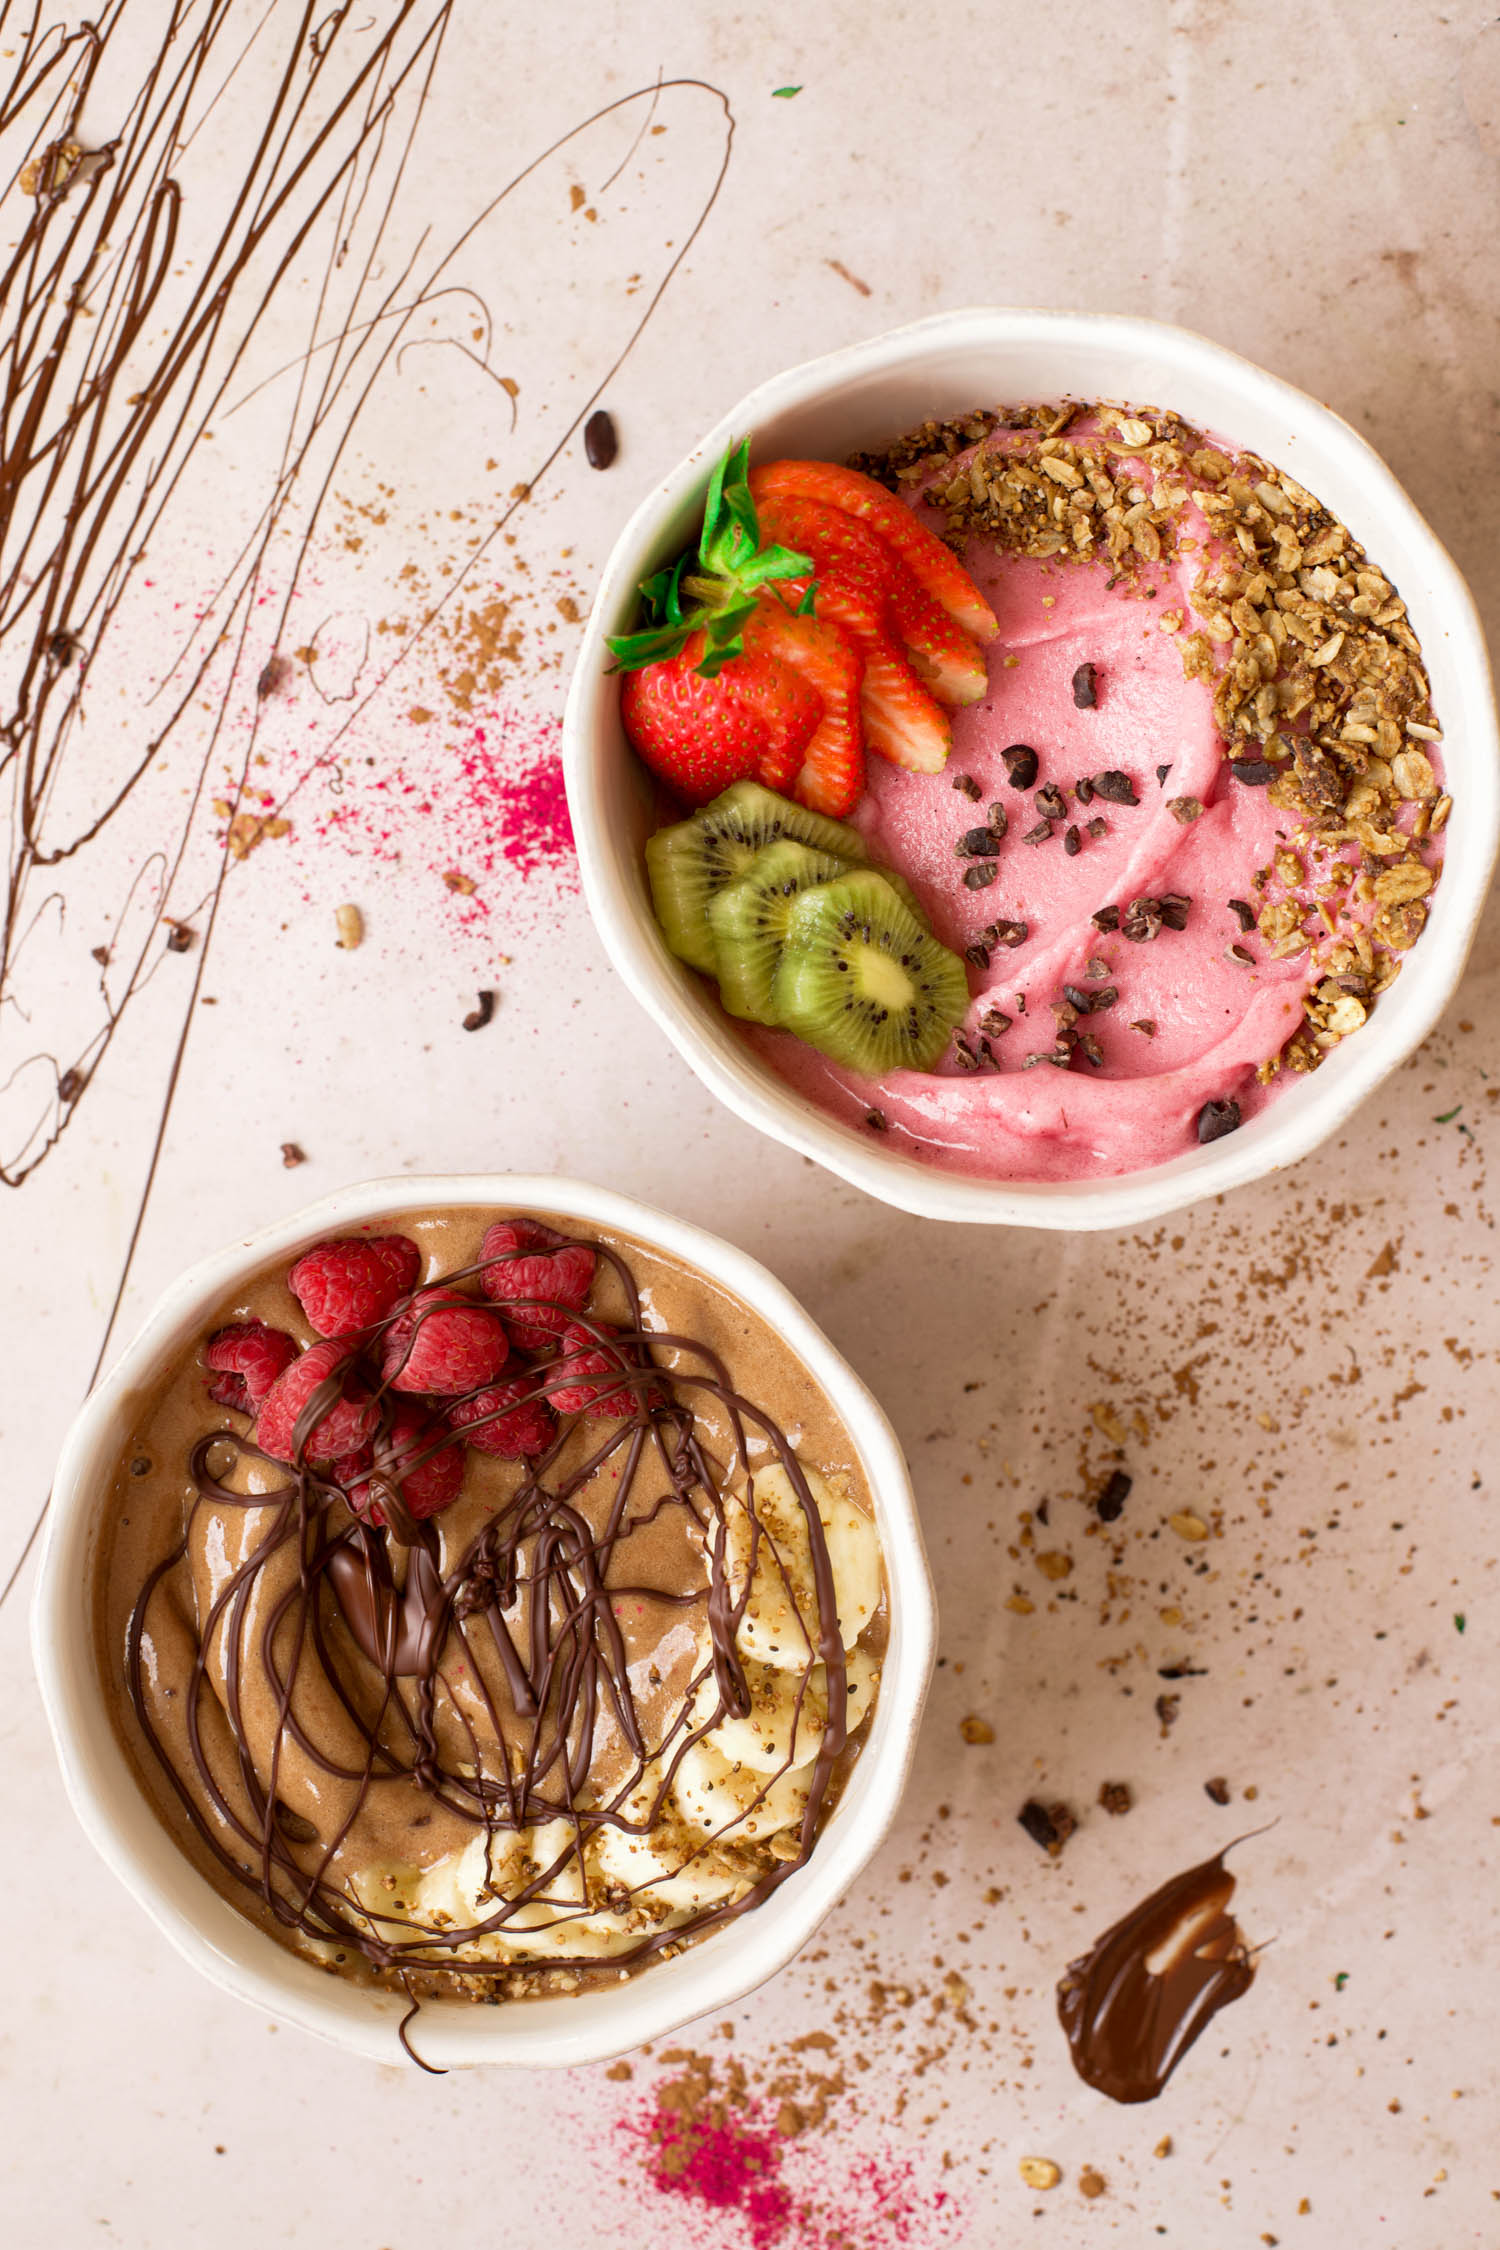 Two smoothie bowls with toppings